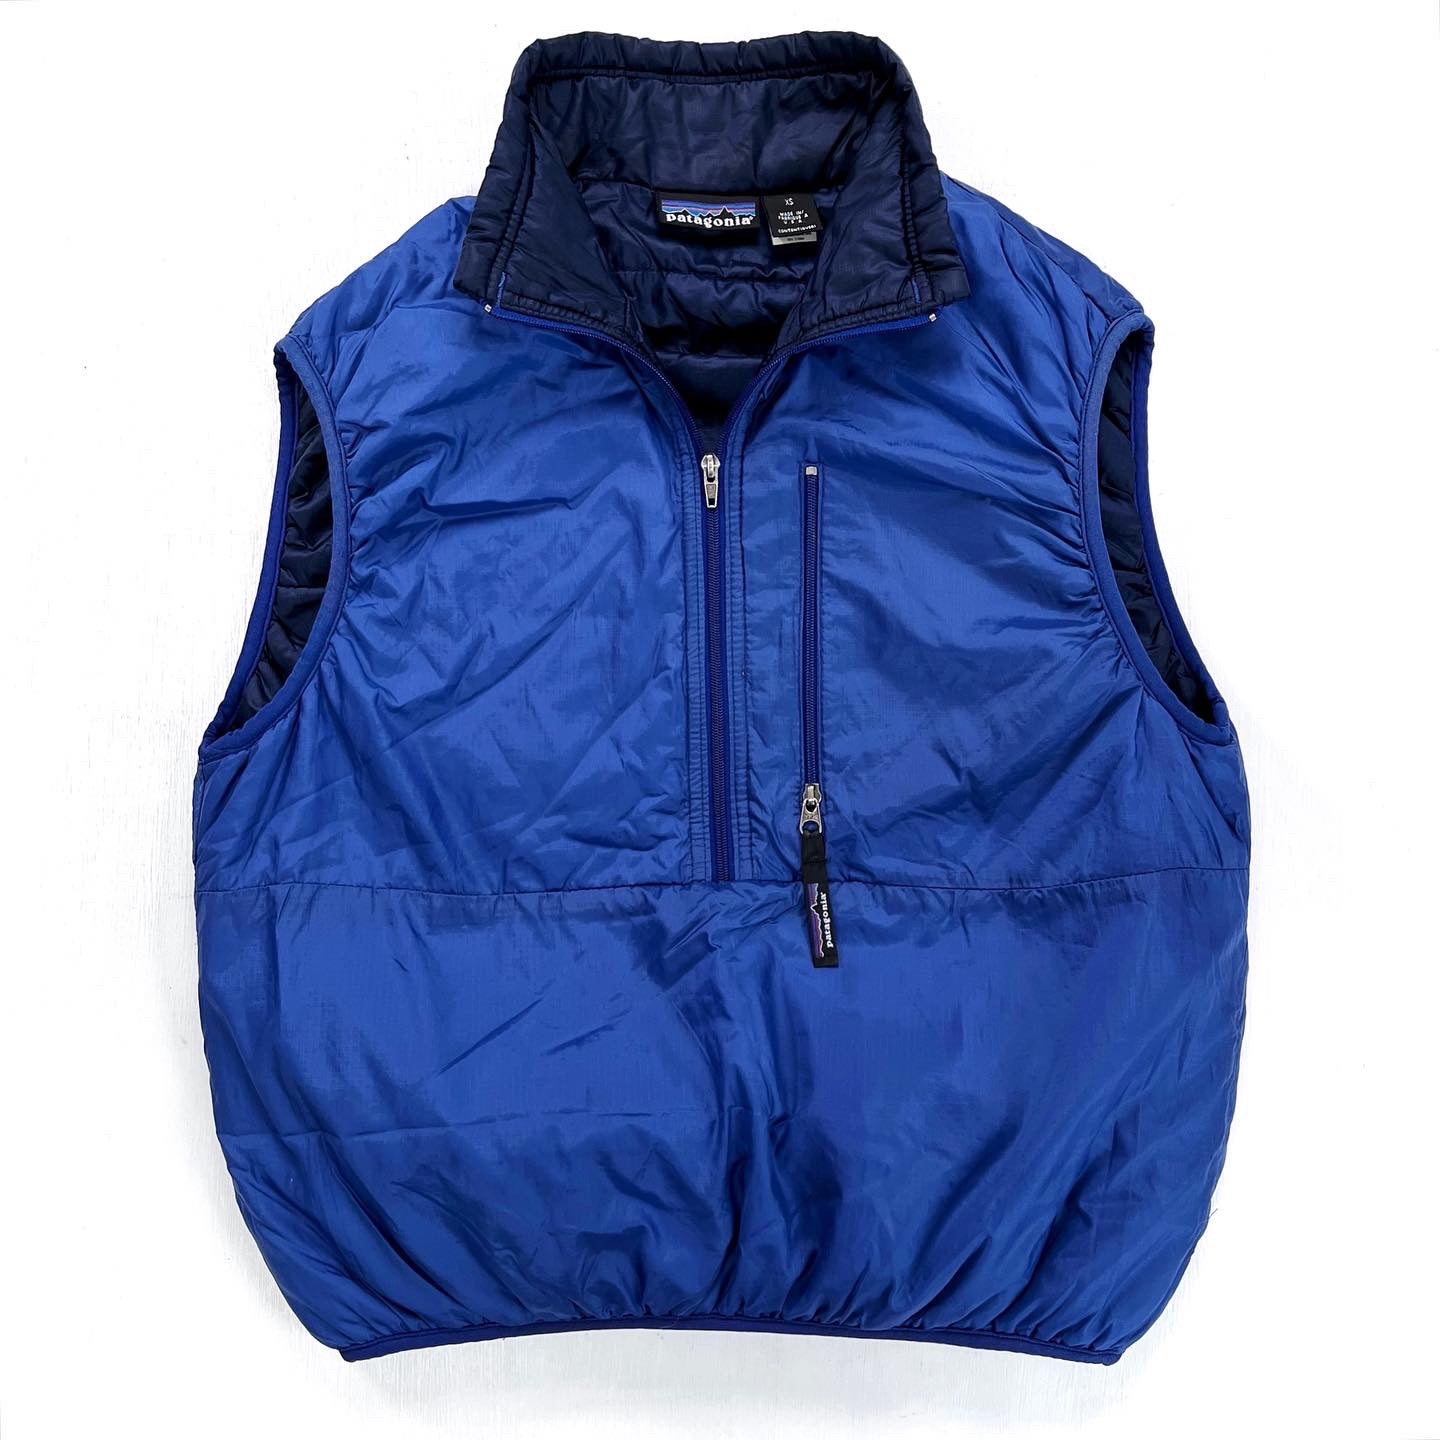 1998 Patagonia Puffball Insulated Ripstop Vest, Storm Blue (XS/S)